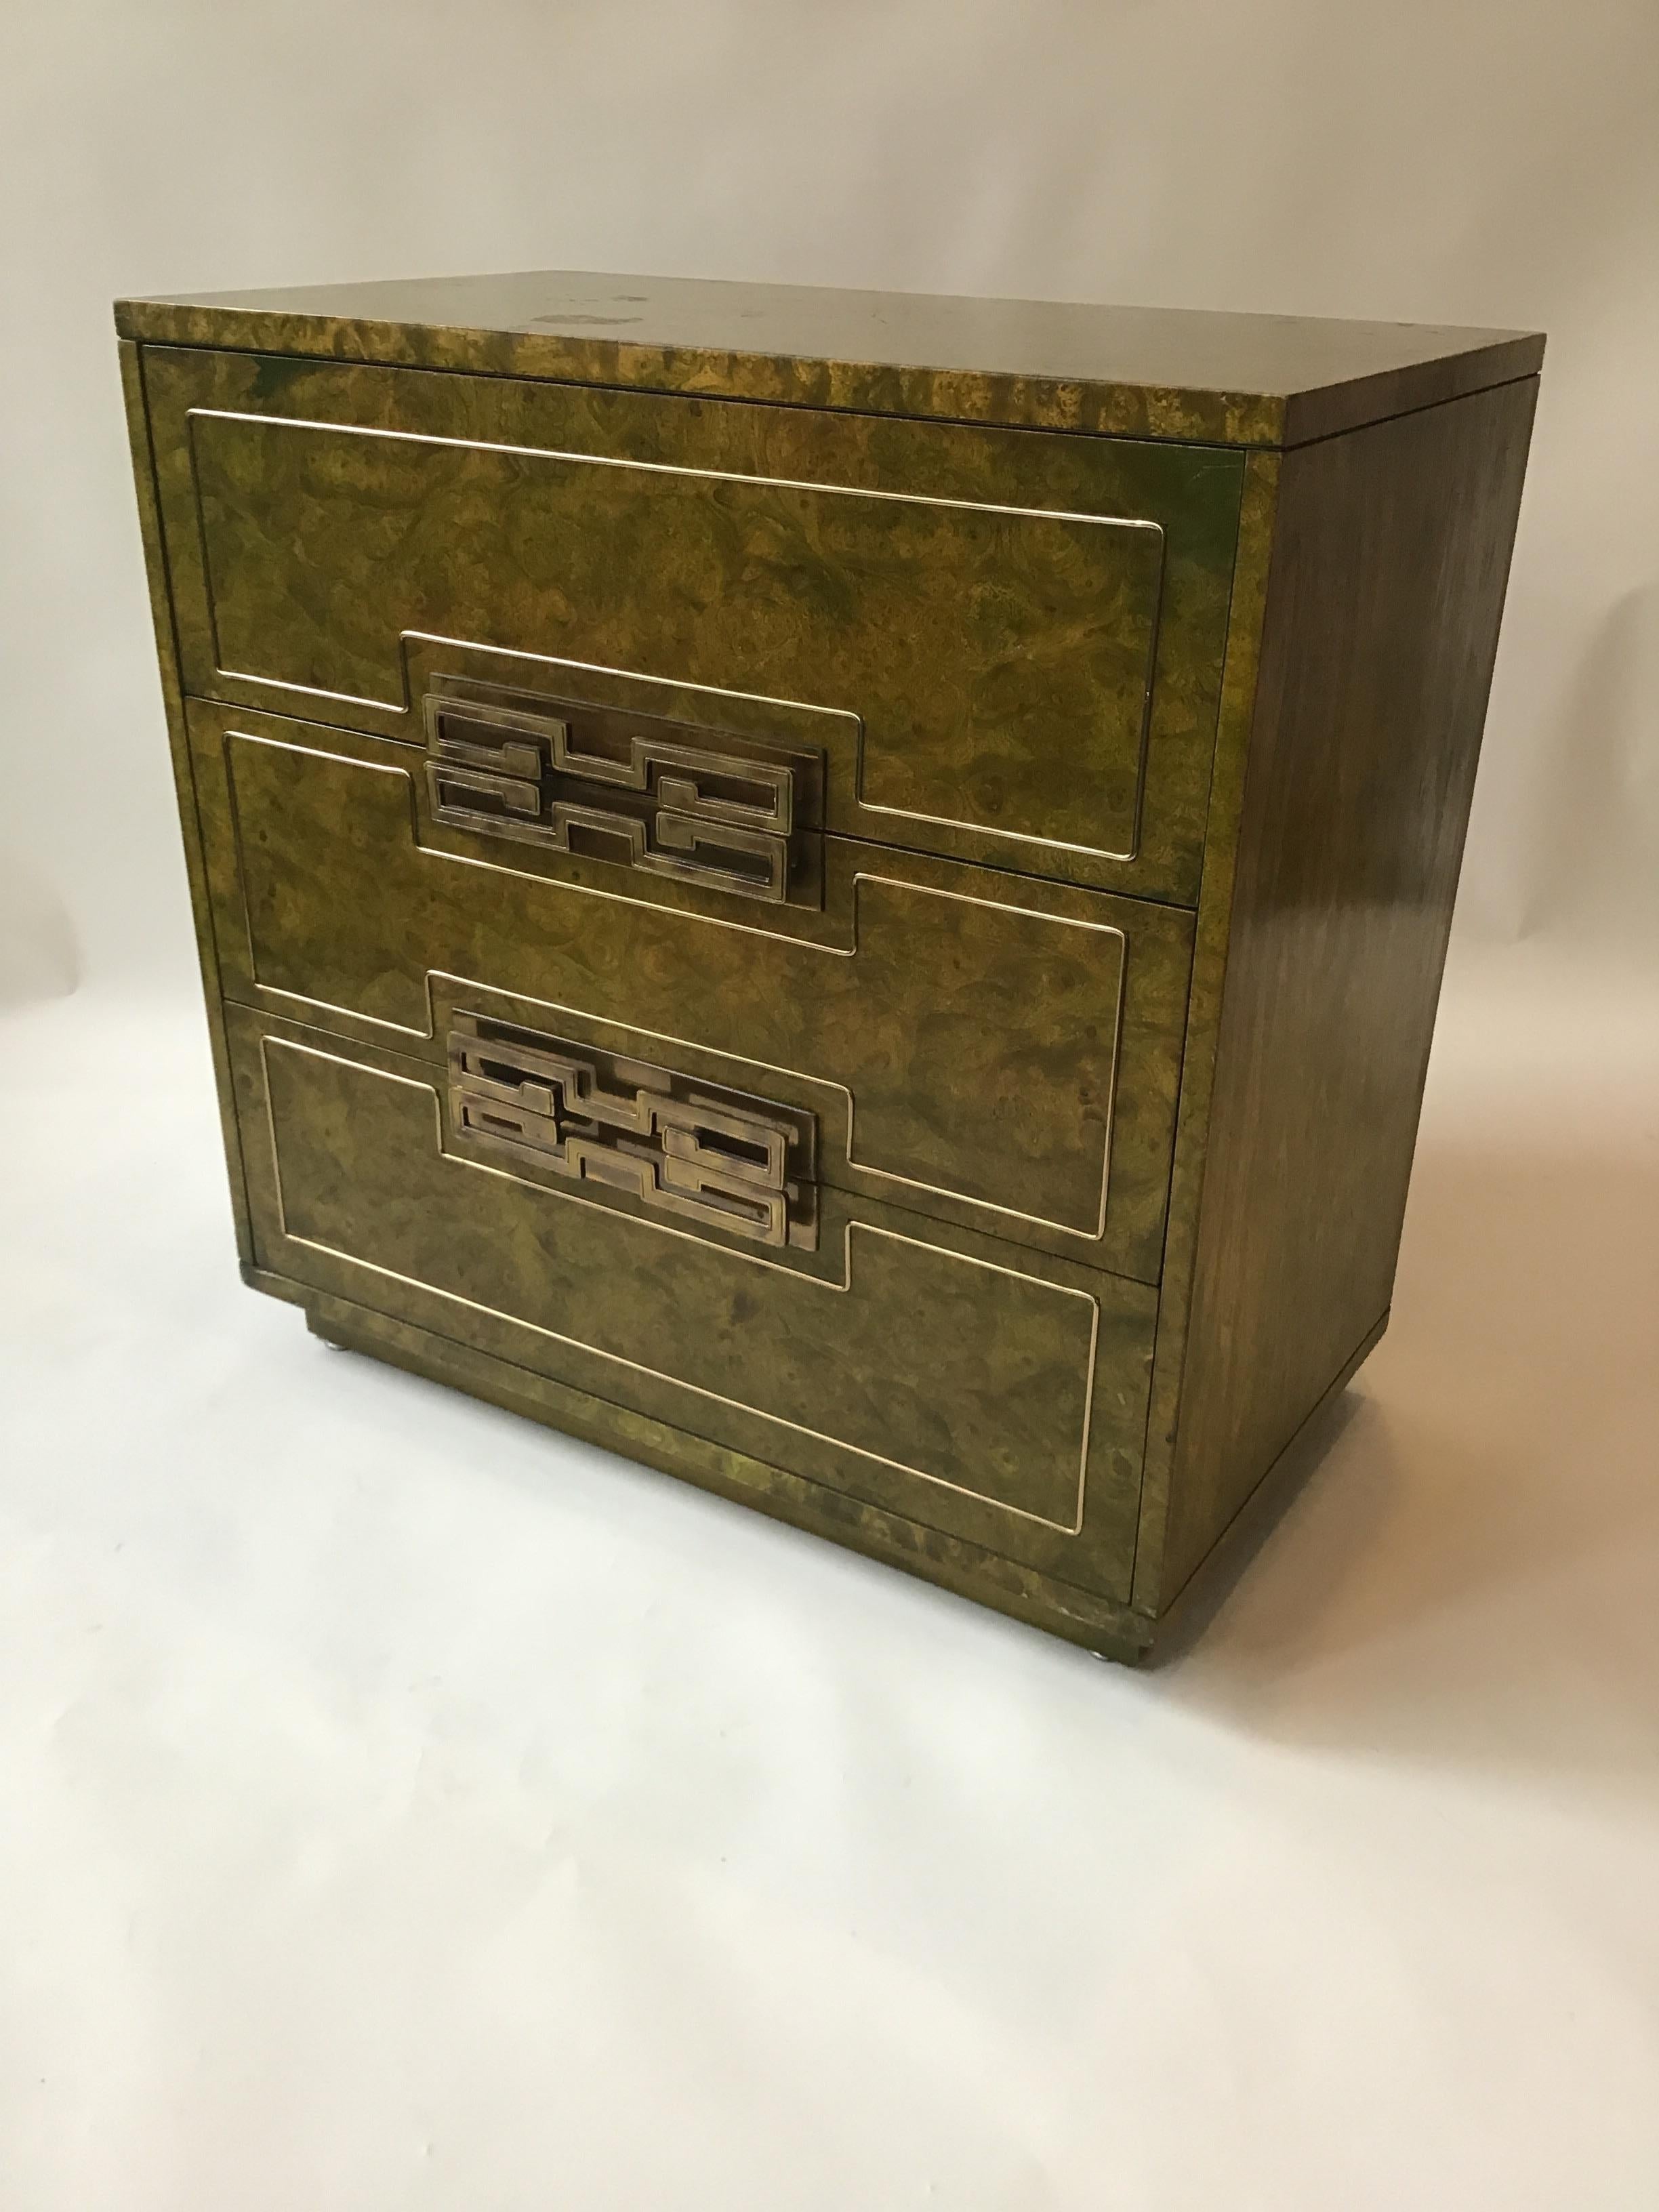 Mastercraft burl wood chest in green tint with brass hardware.